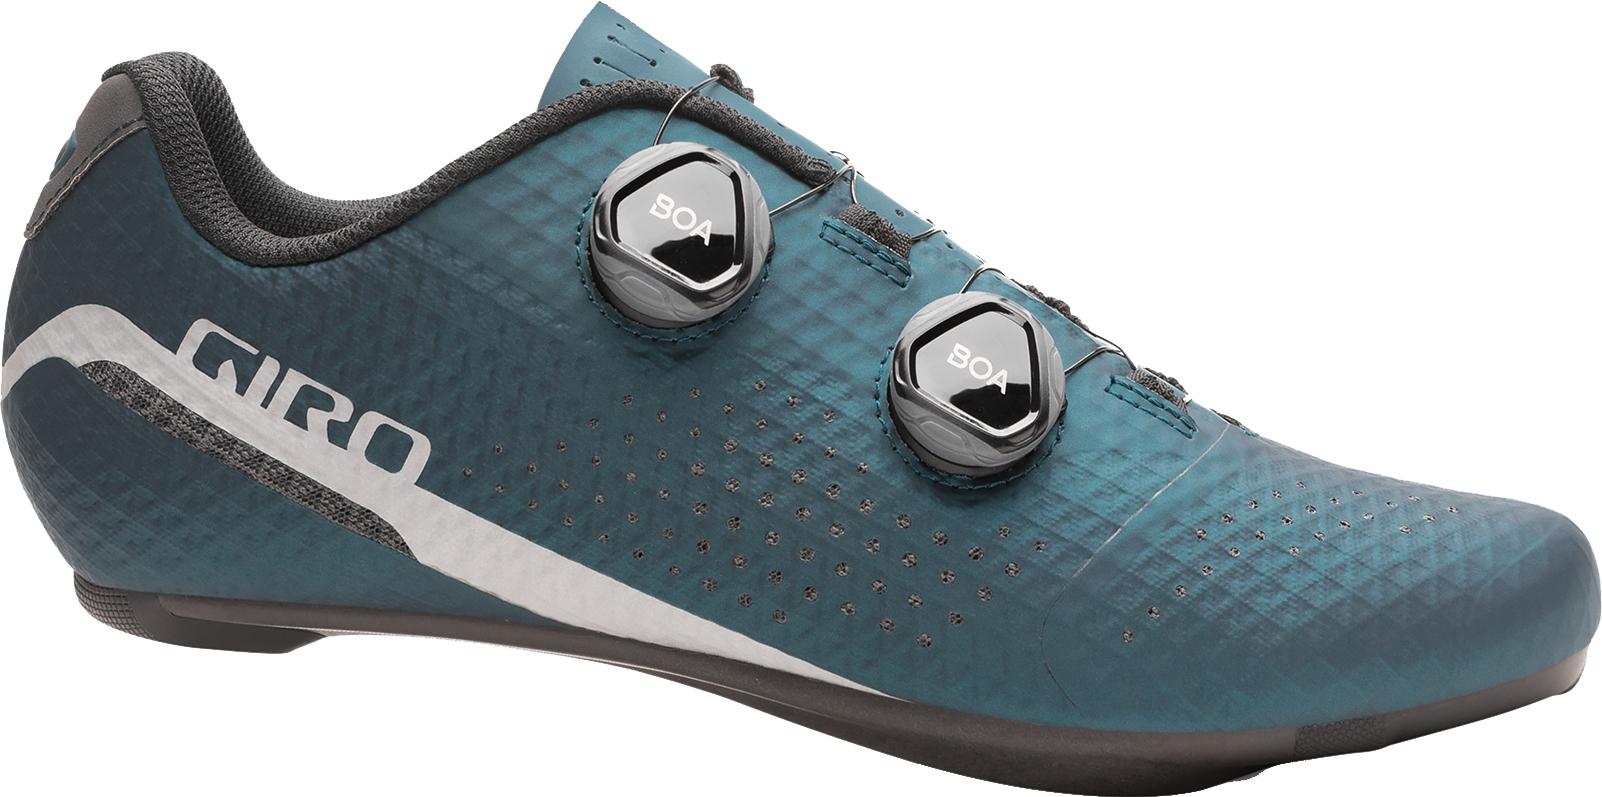 Giro Regime Road Cycling Shoes - Harbour Blue Ano